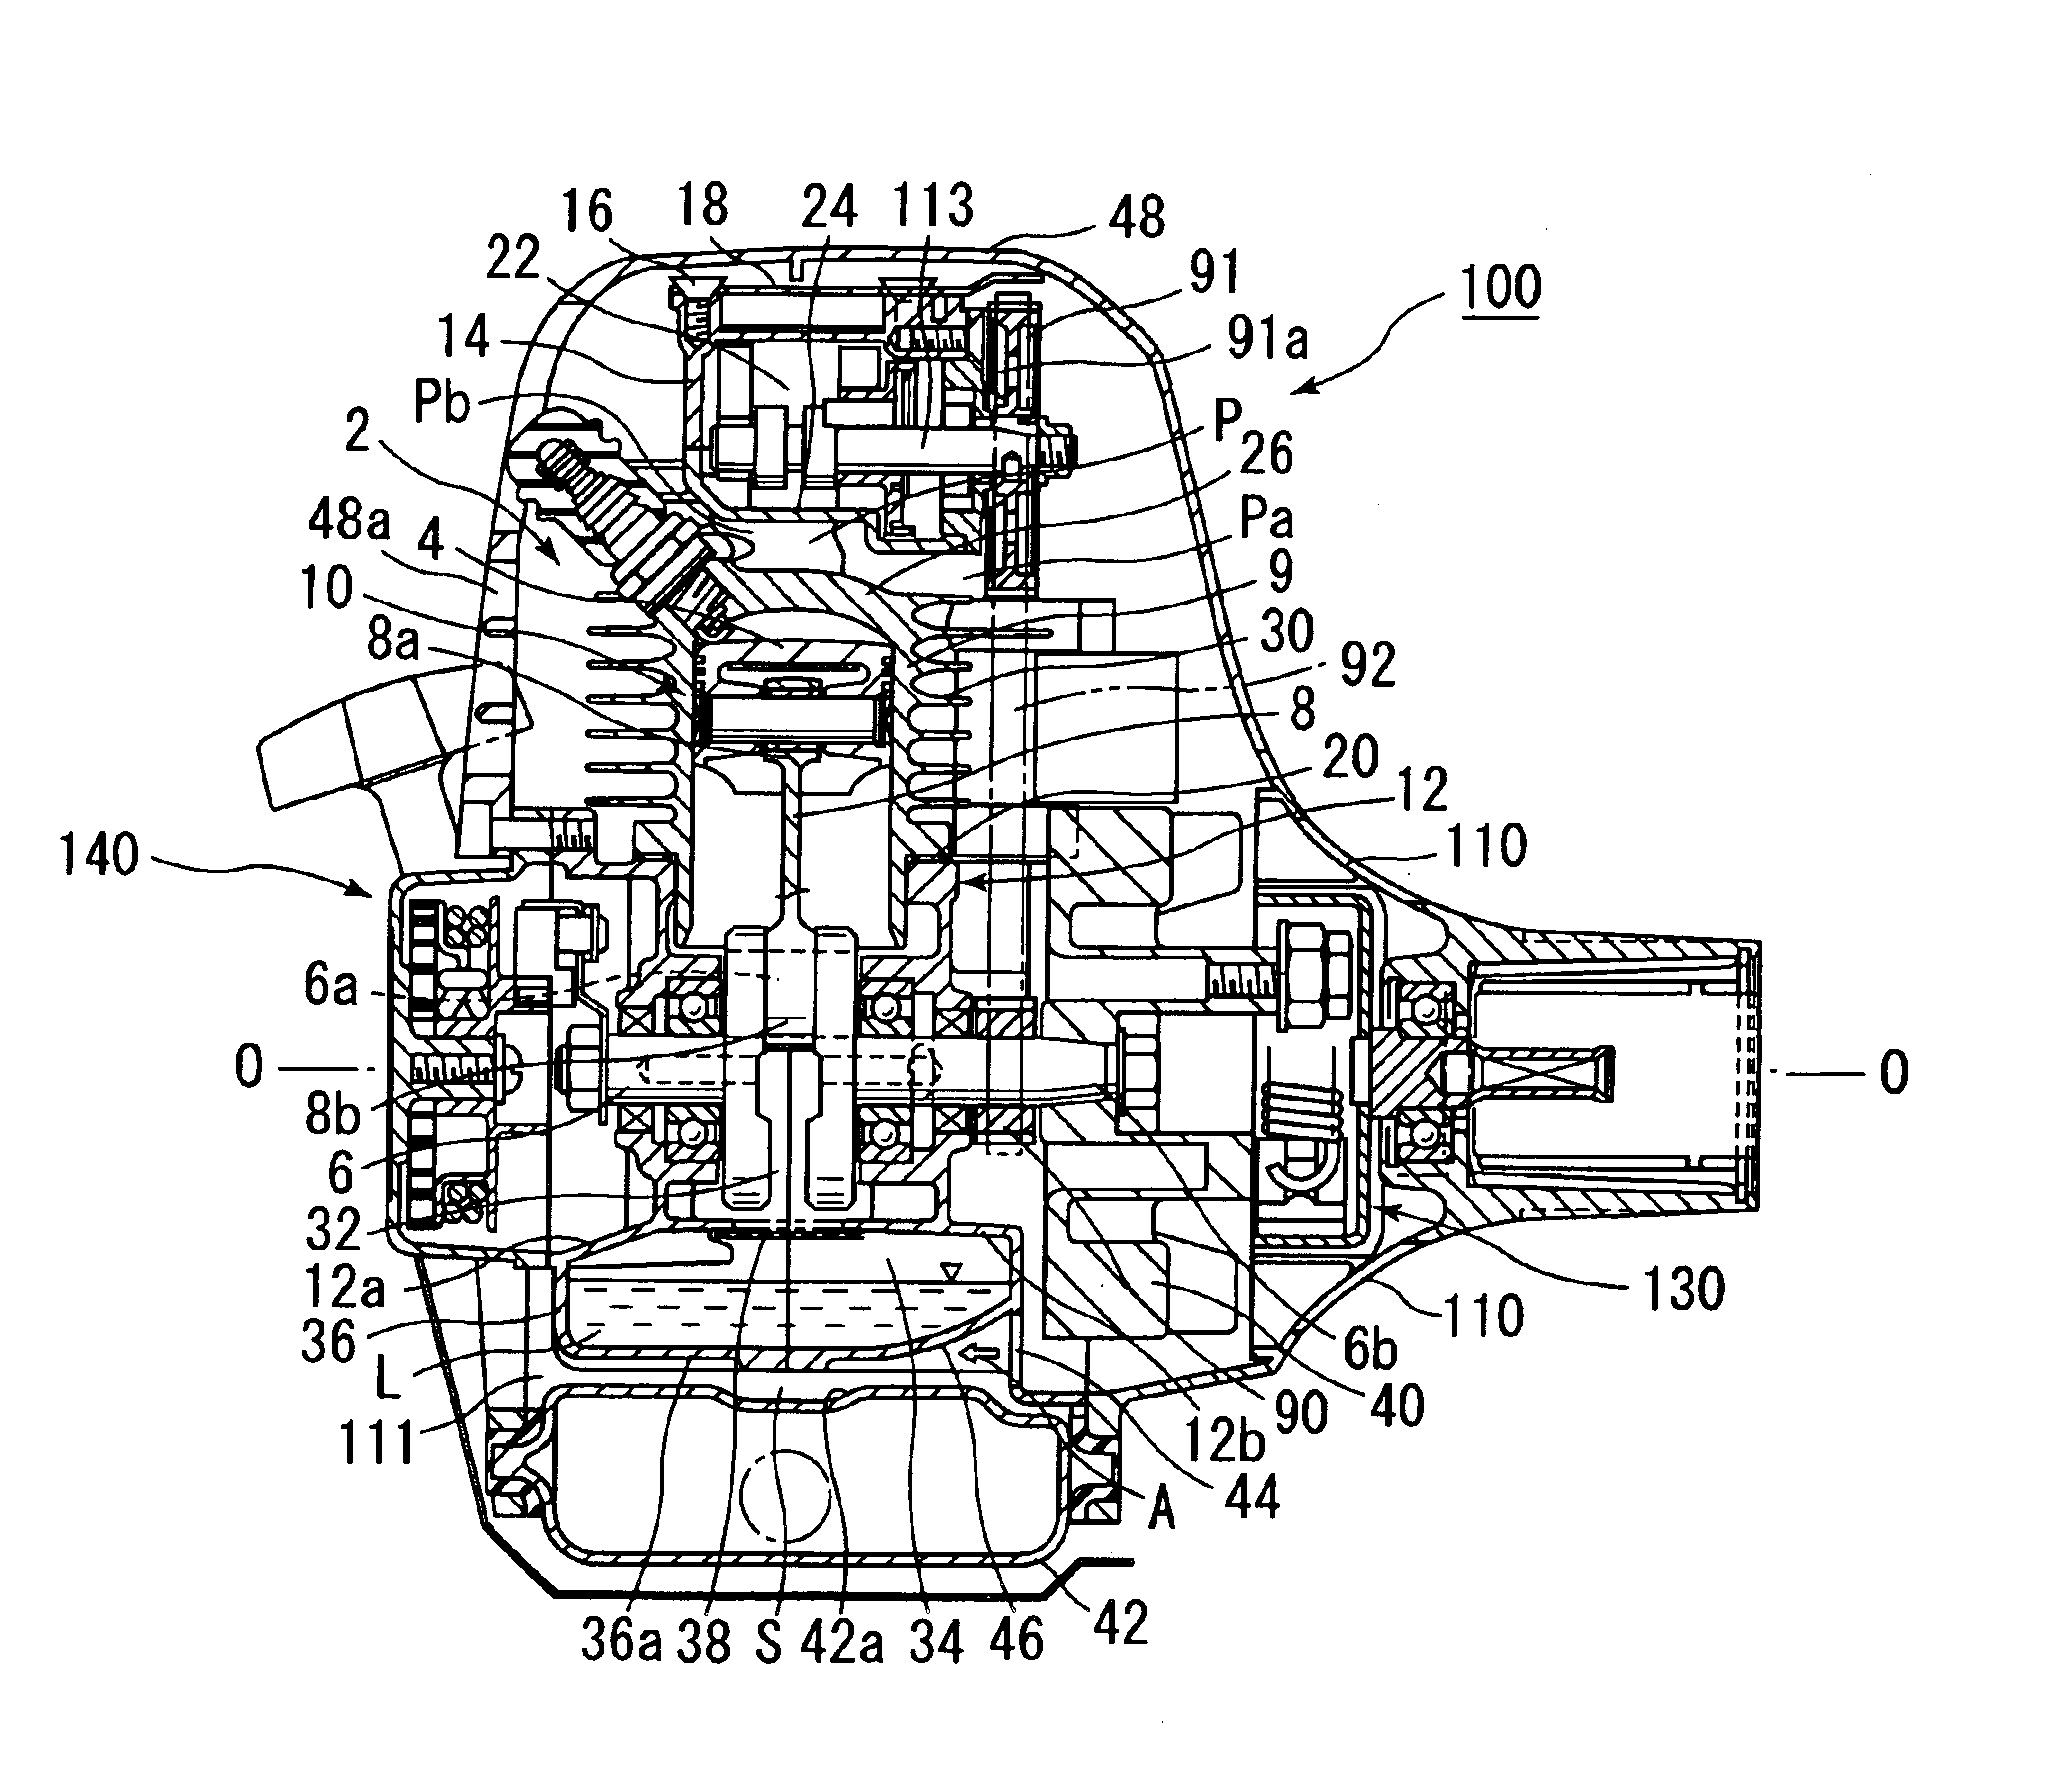 Air-cooled four-stroke internal combustion engine